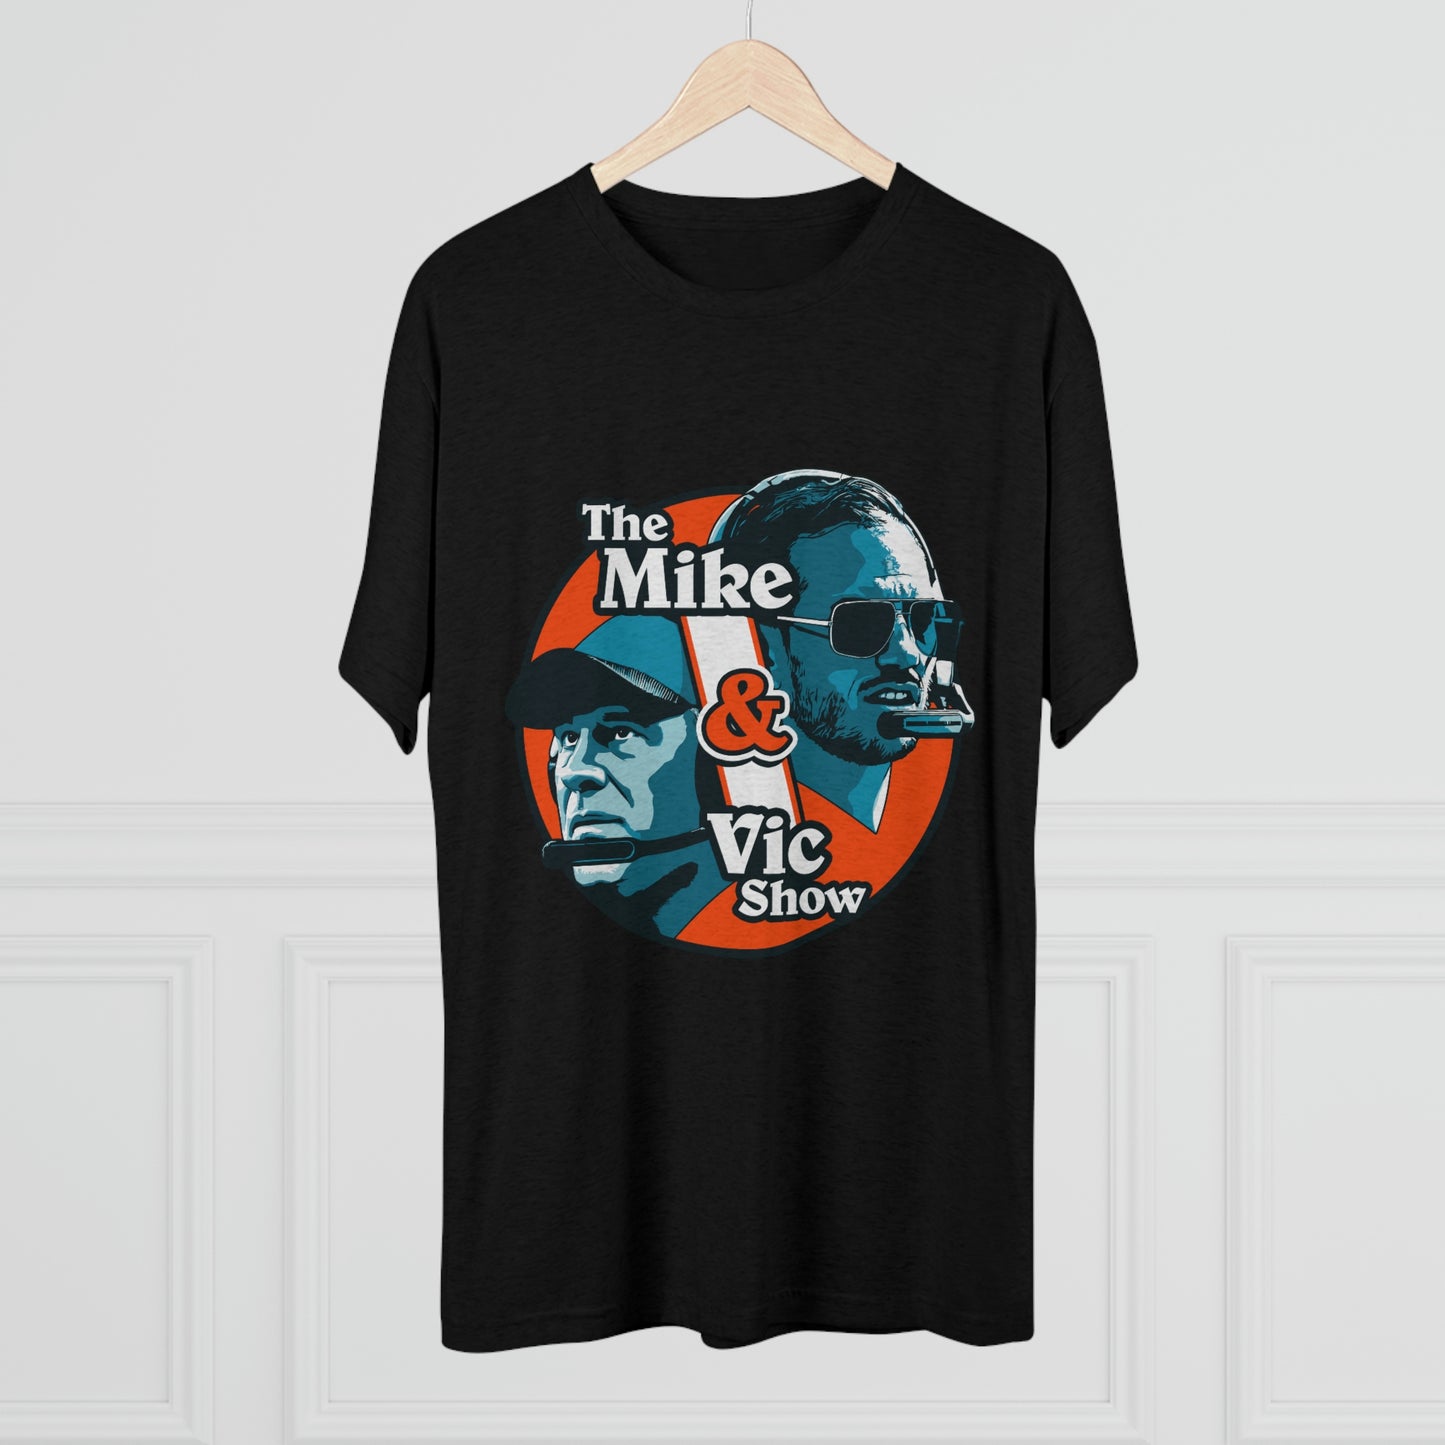 The Mike & Vic Show